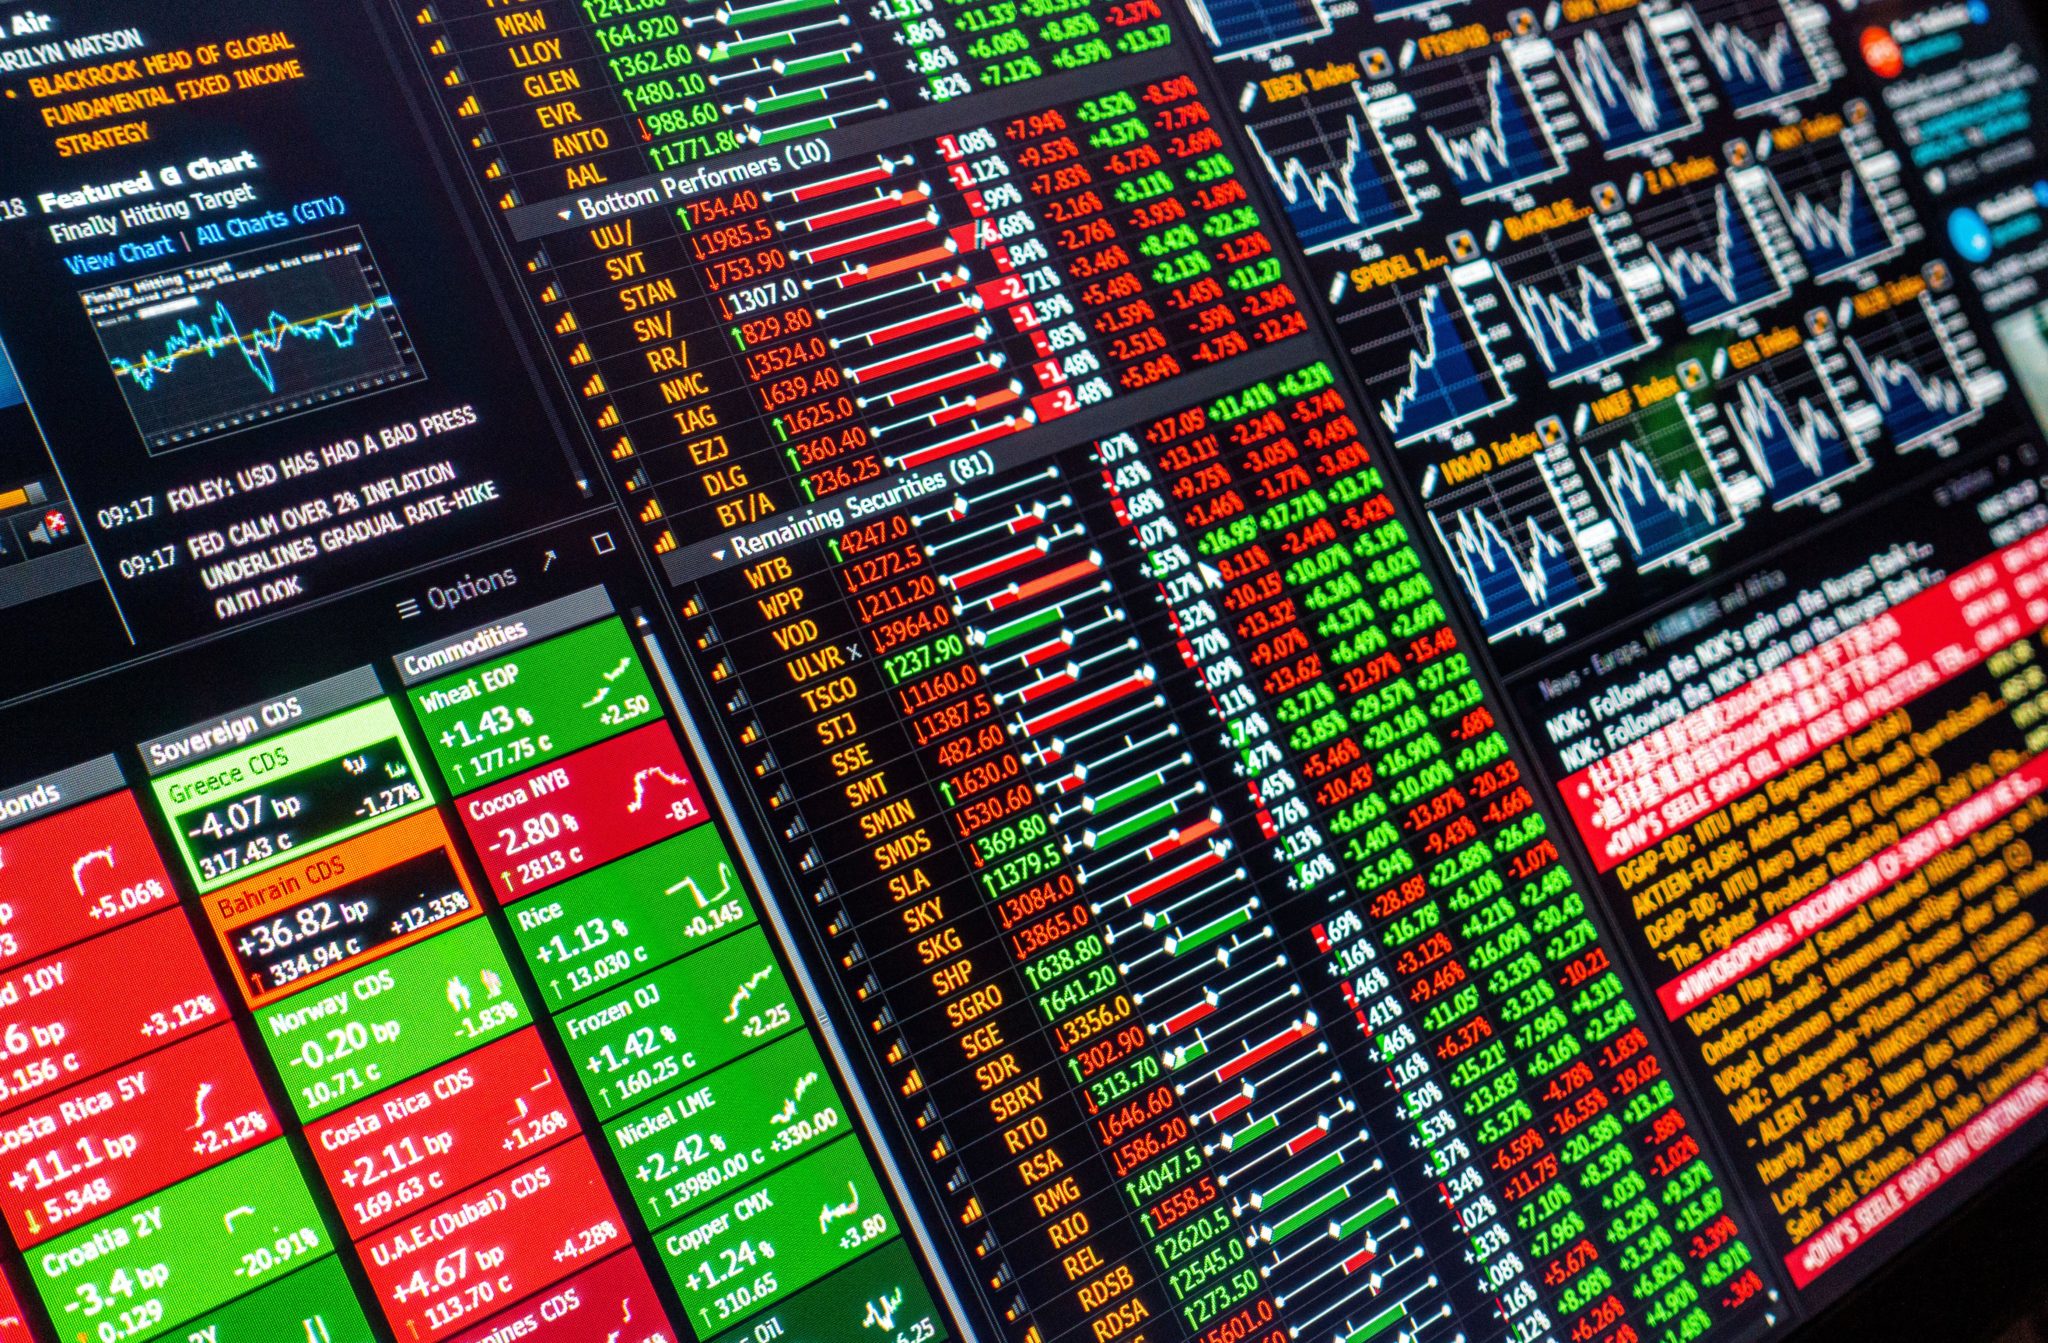 A computer screen showing stock exchange finance data, 16-5-18. 